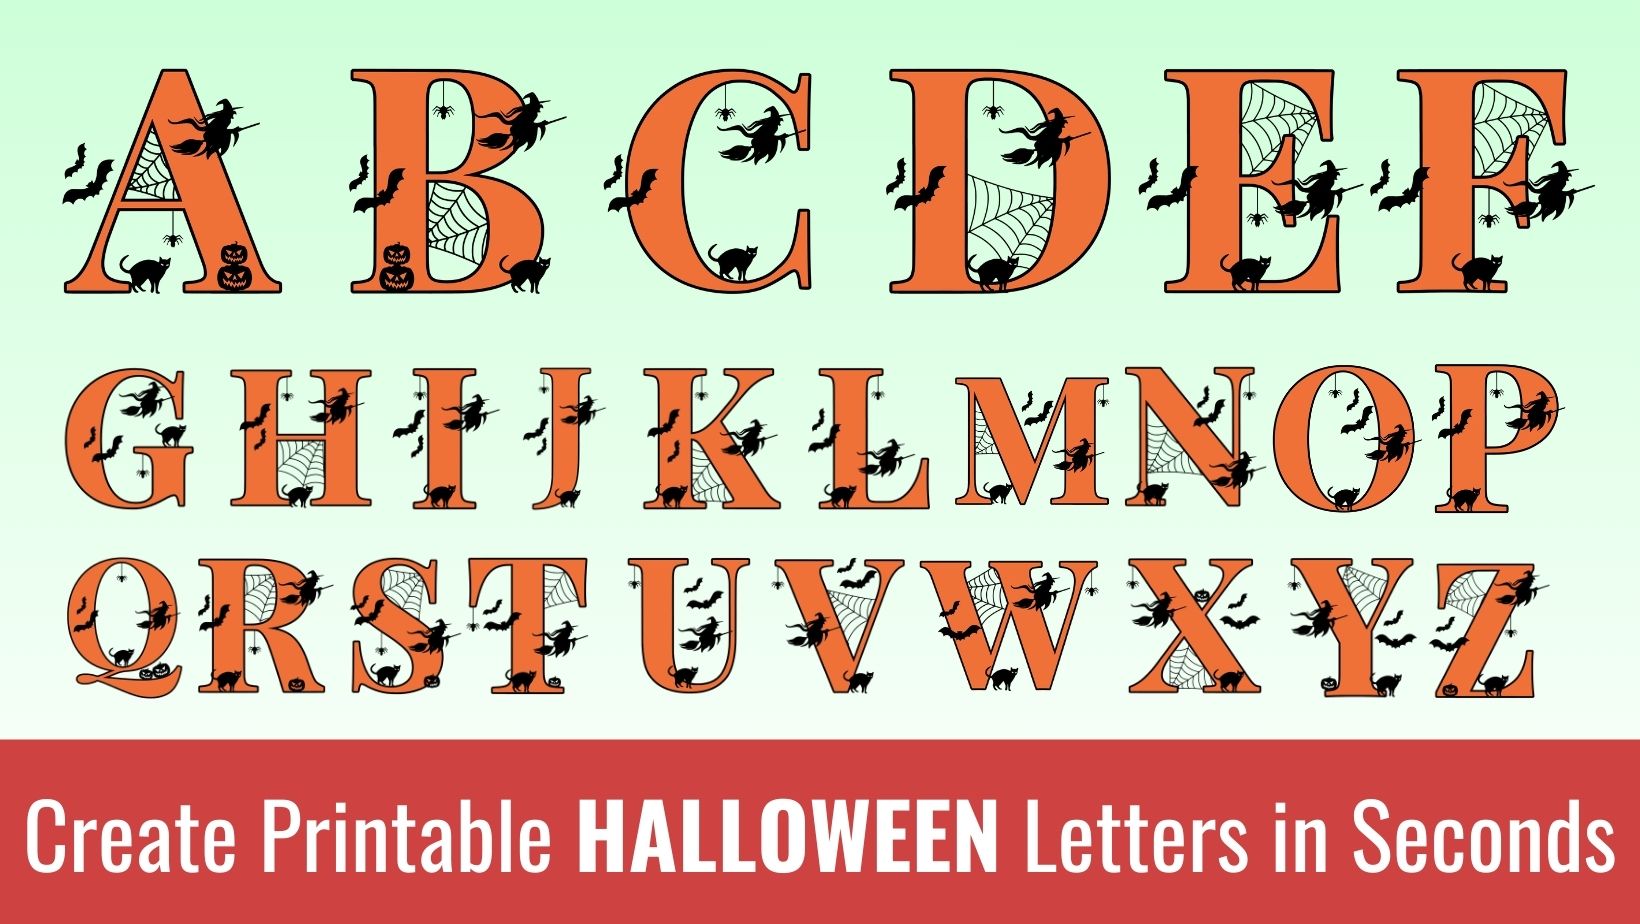 Printable halloween Letters: Free Alphabet Font and Letter Templates, spider web pattern